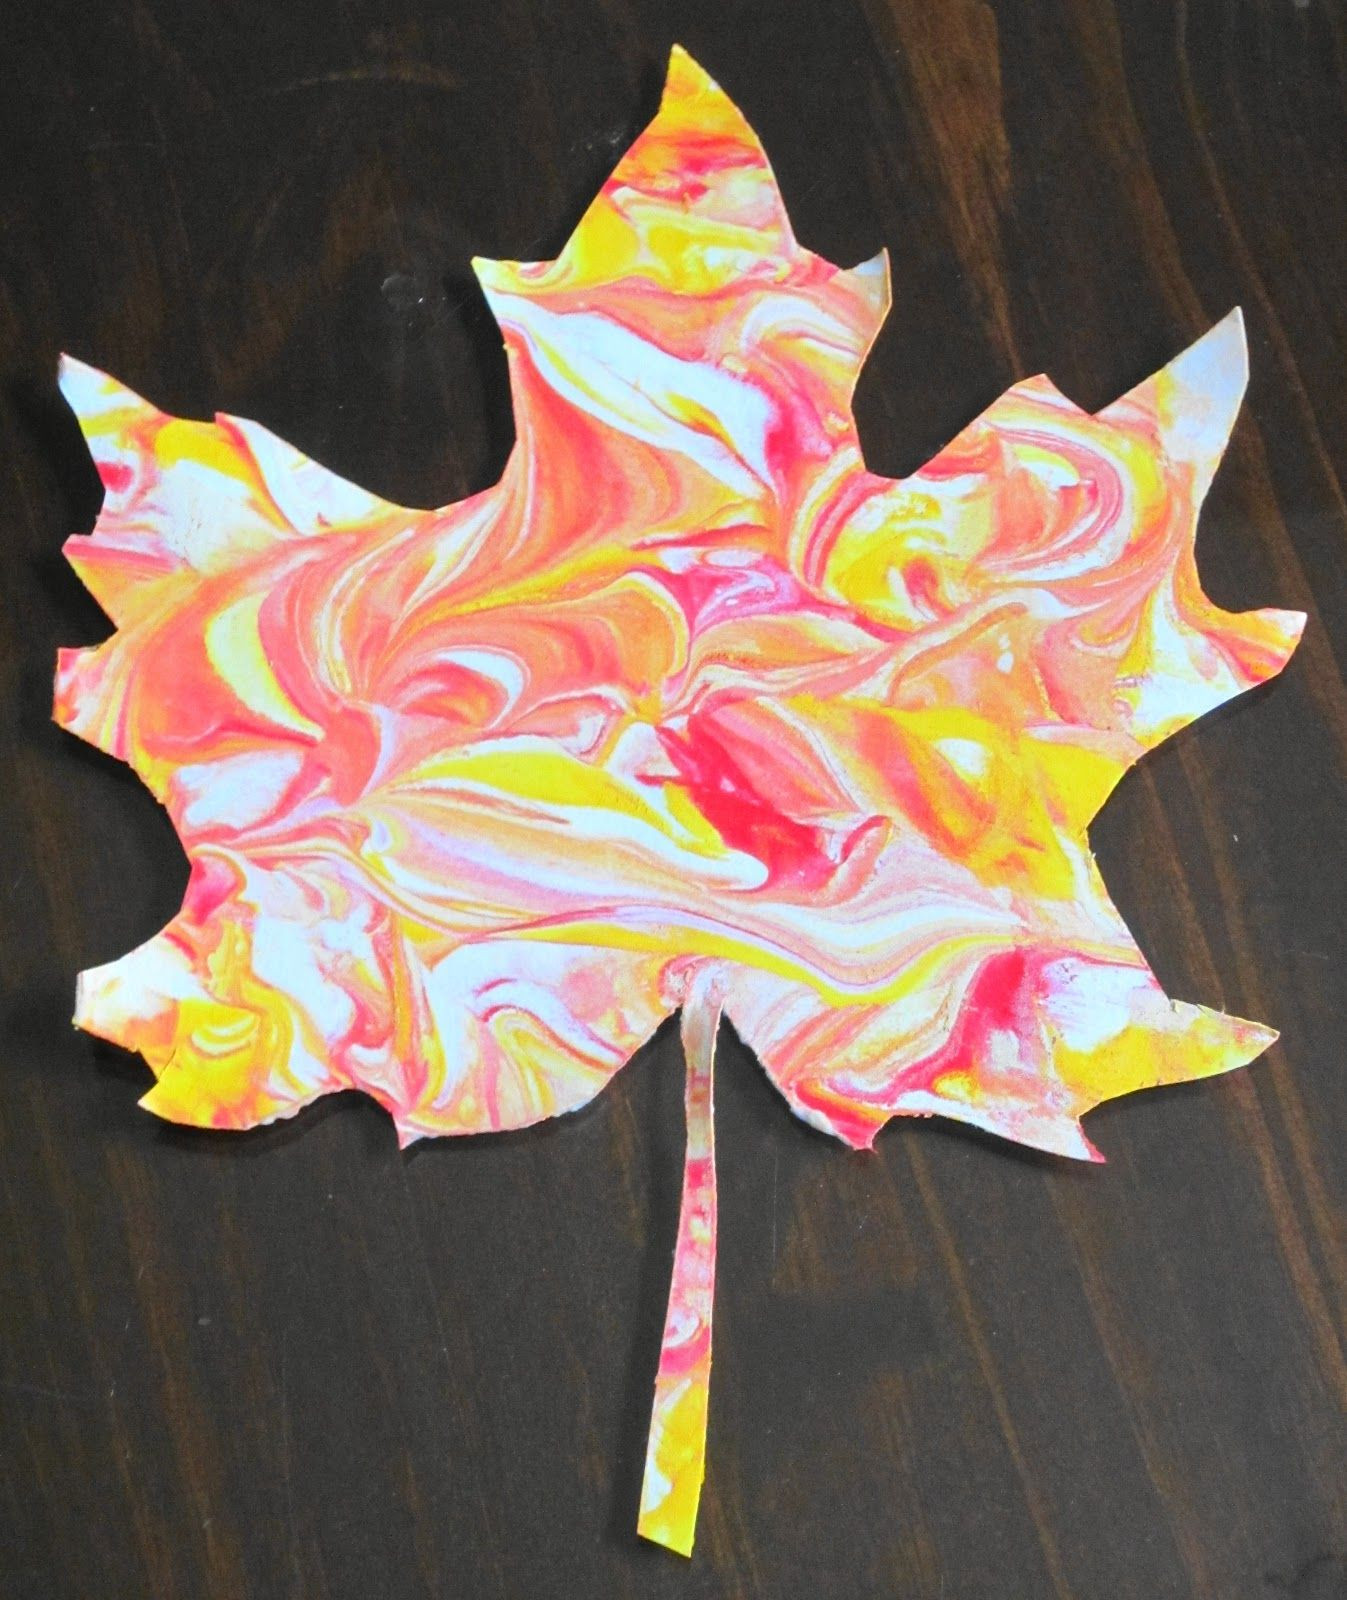 Fall Art Projects For Kids
 Create marbled fall leaves with shaving cream